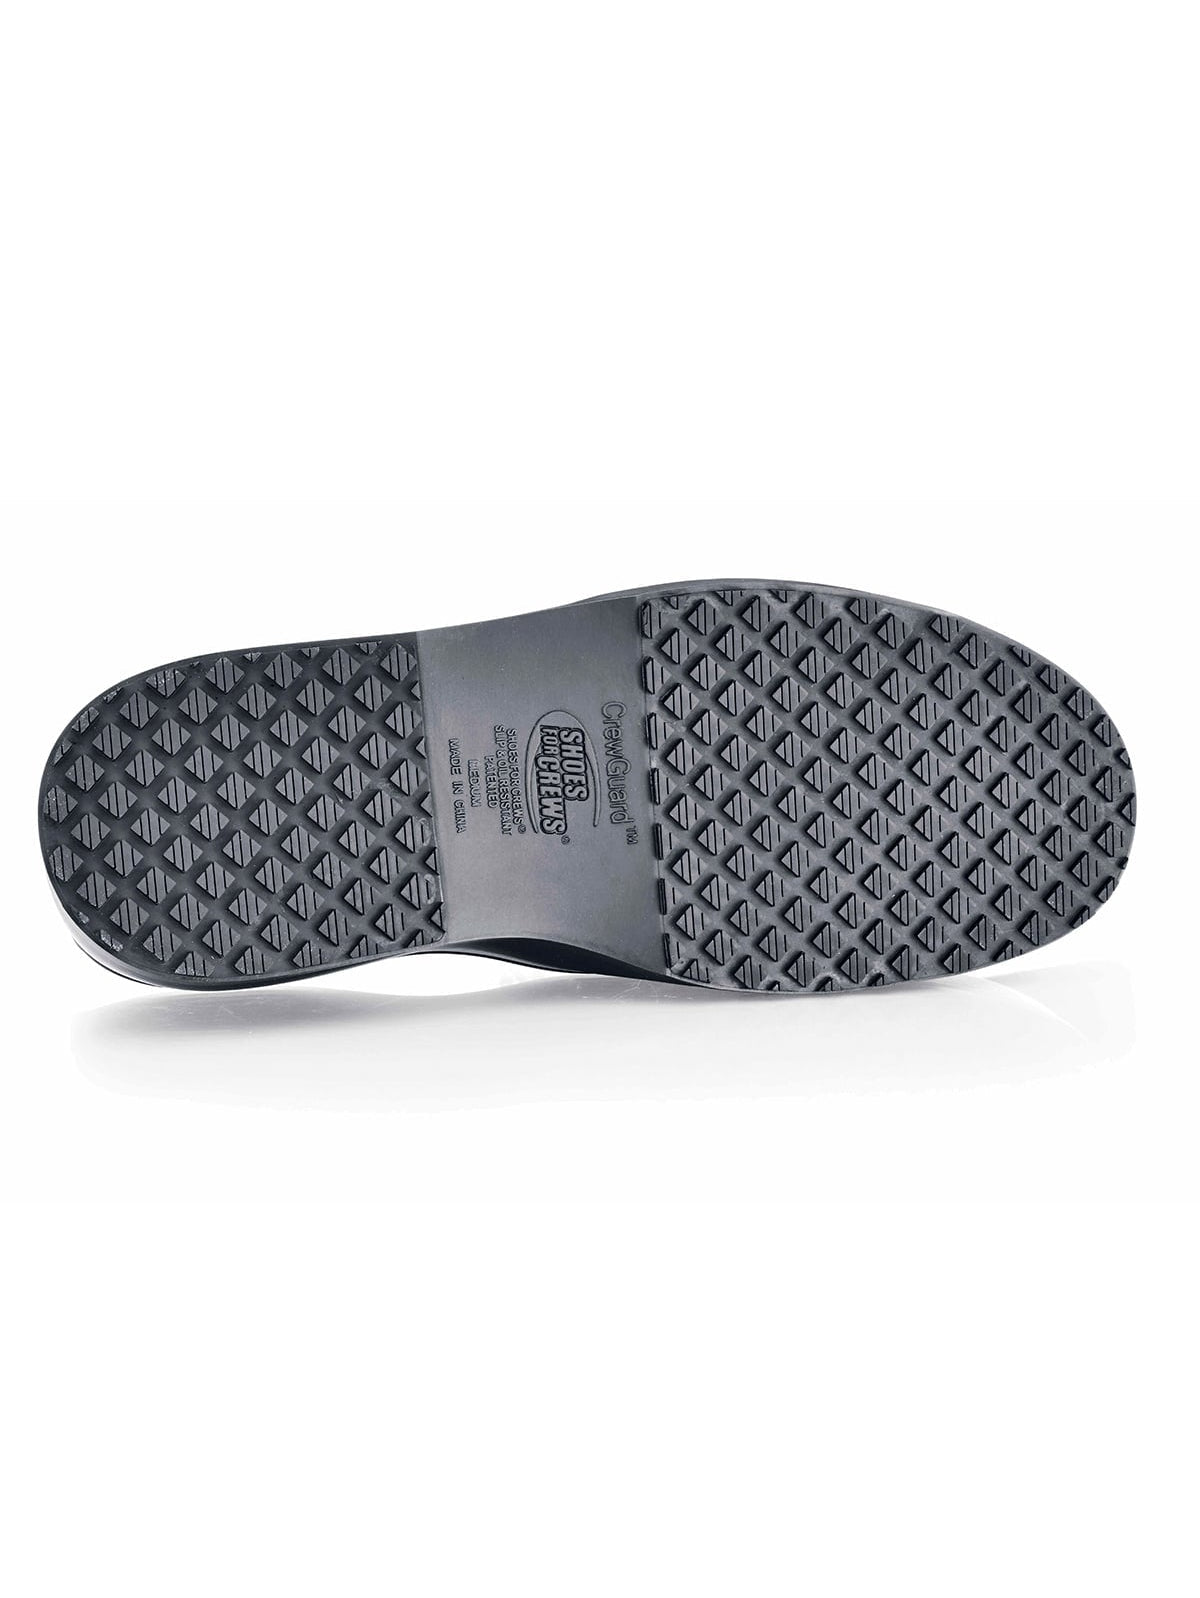 Unisex Safety Toe Crewguard by Shoes For Crews -  ChefsCotton